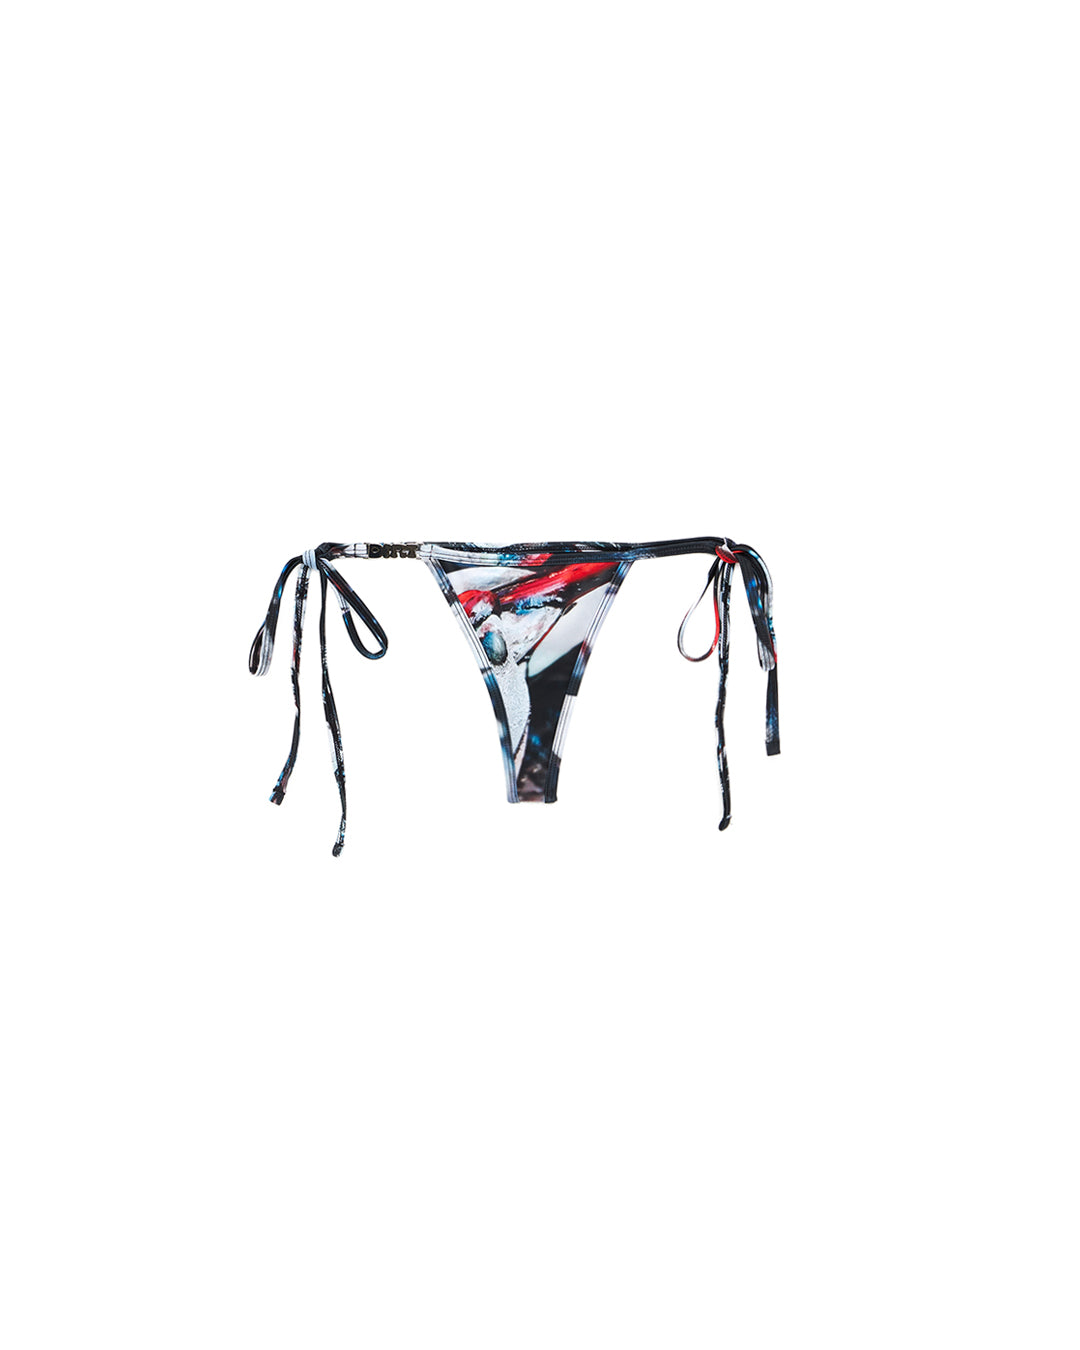 Dirt- Bikini Bottom Urchin Print - Error404store. Bikini bottoms with red, blue and grey 'coral' print. Made by Bali based emerging designers called Dirt. Sold in Melbourne clothing boutique called Error404store.